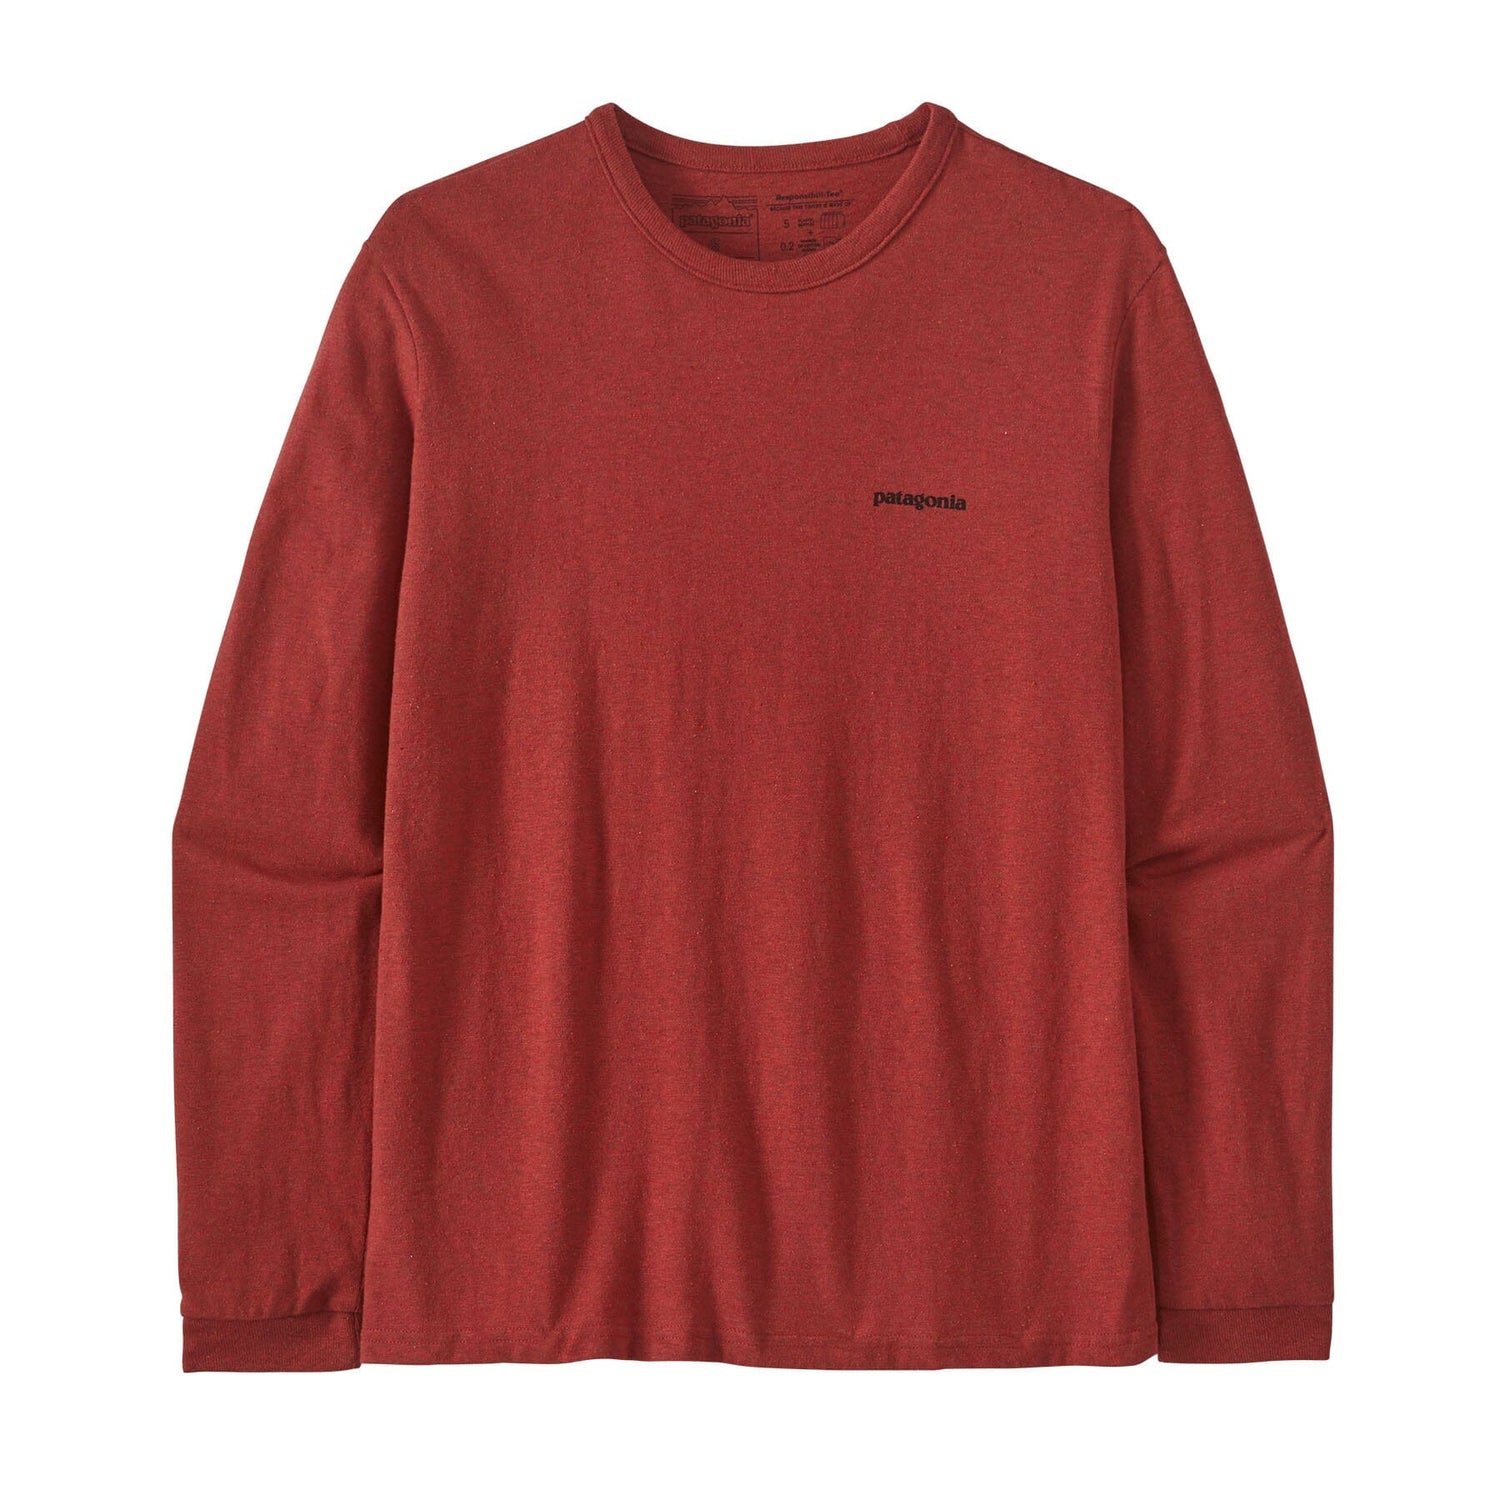 Patagonia - W's L/S P-6 Logo Responsibili-Tee - Recycled Cotton & Recycled Polyester - Weekendbee - sustainable sportswear